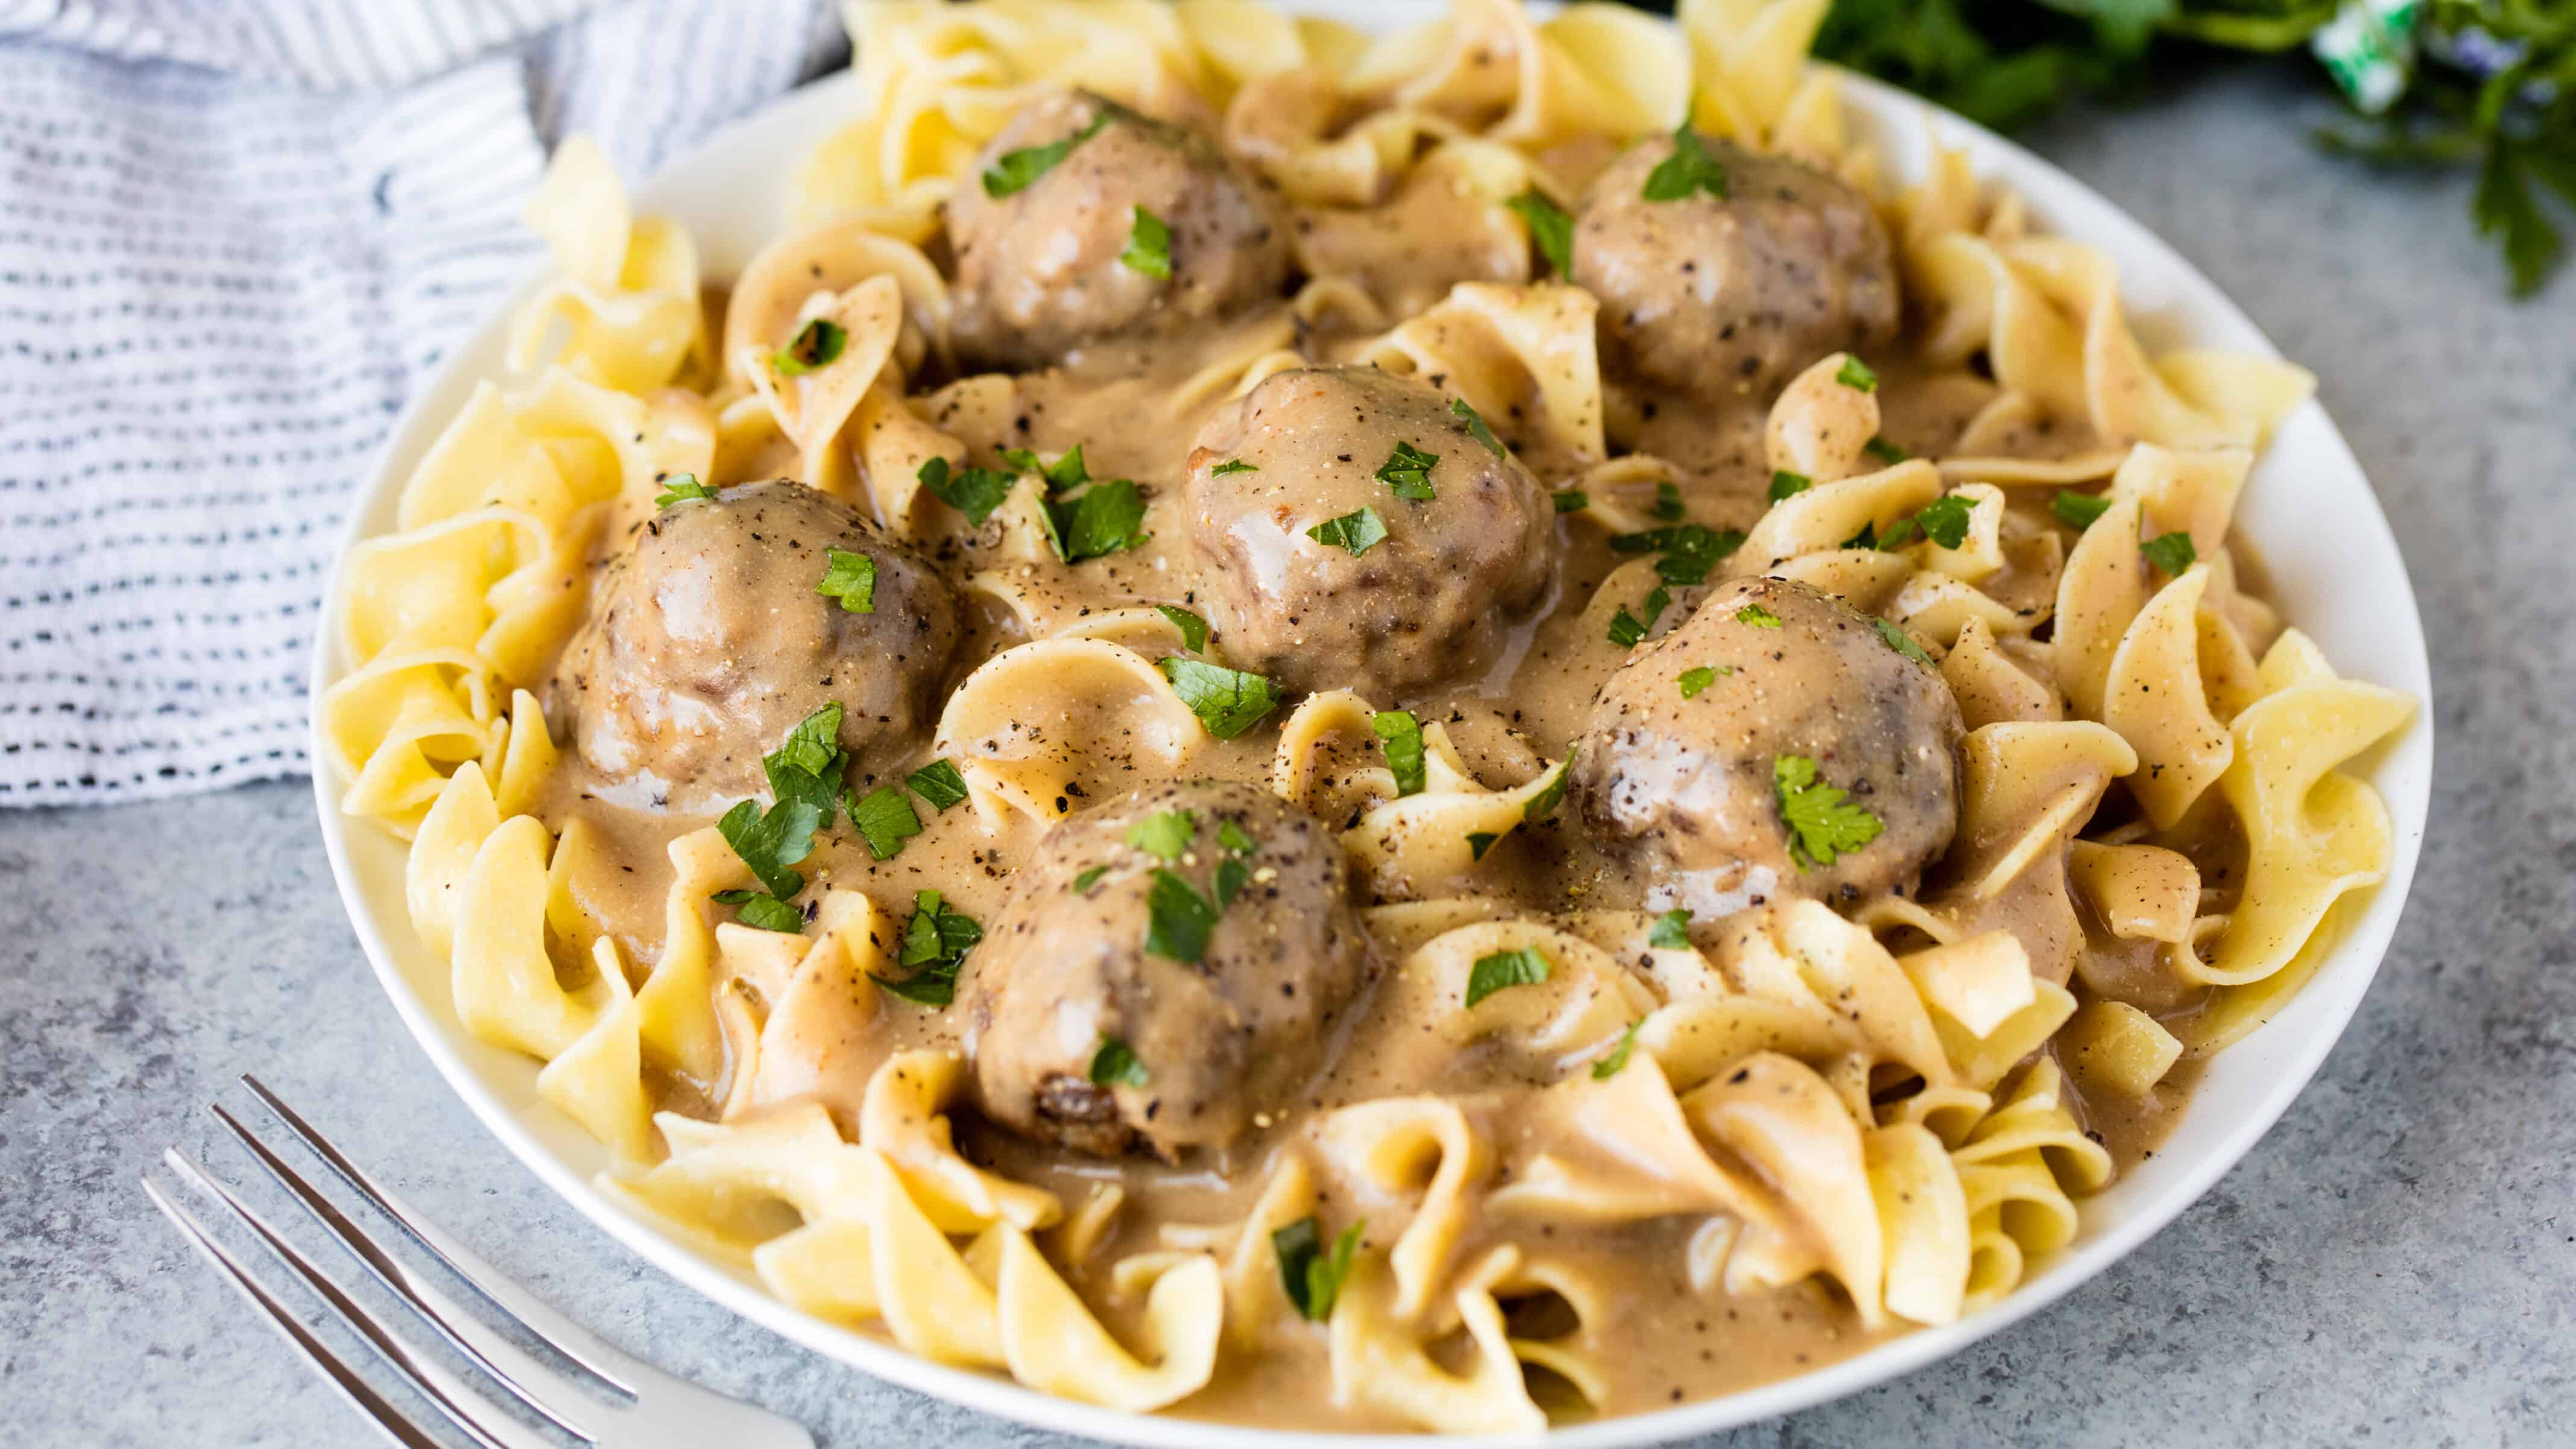 Swedish meatballs and gravy over egg noodles on a white plate.